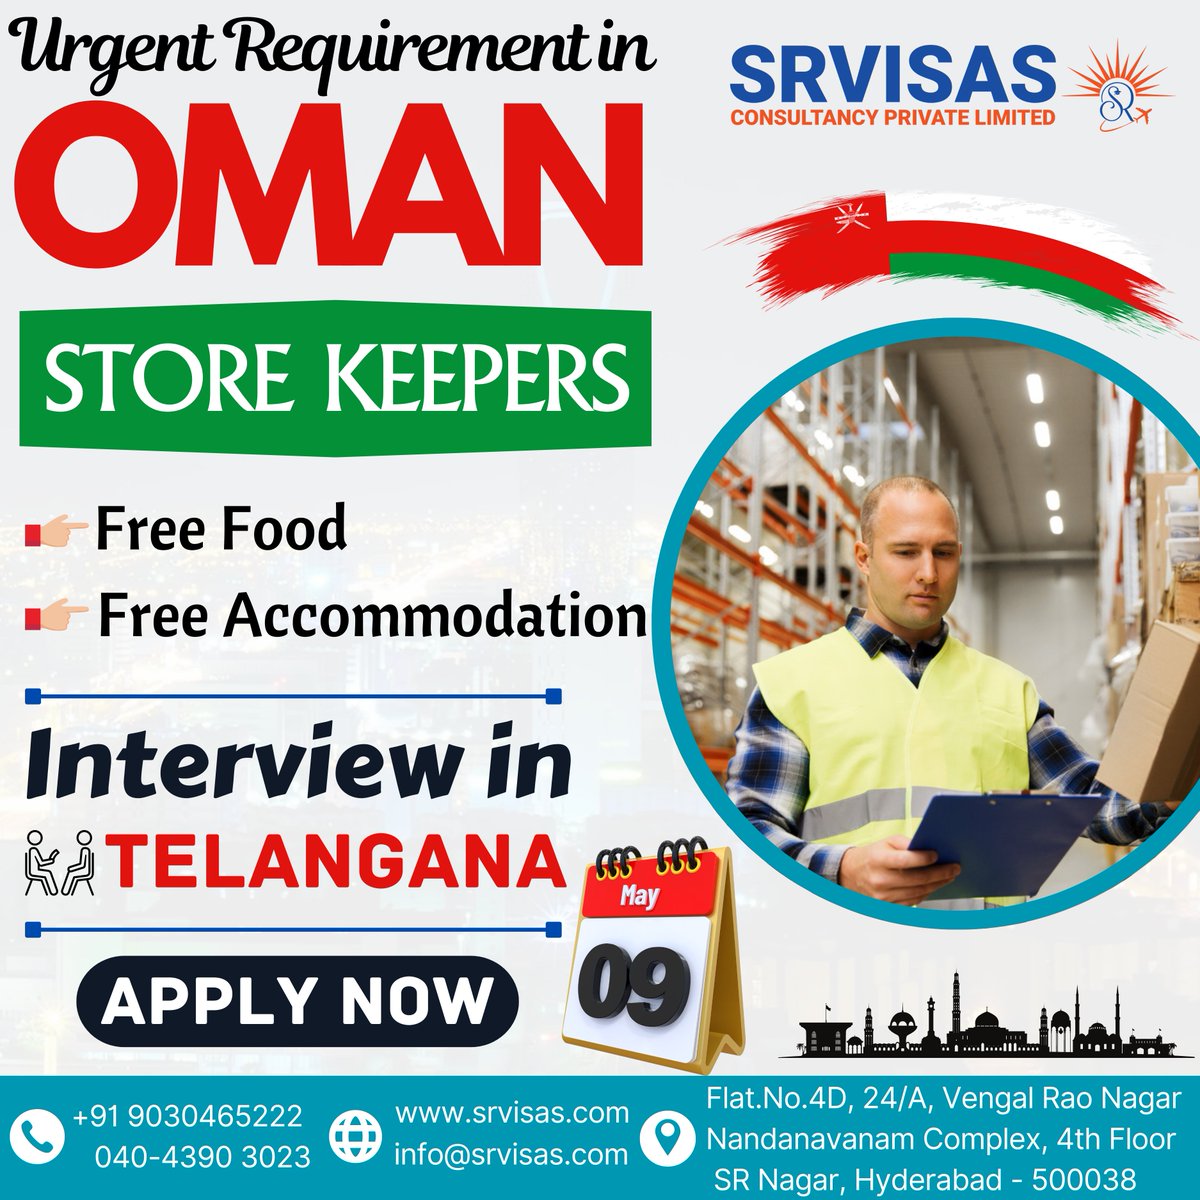 Urgent Requirement in OMAN. Store Keeper Positions Available.
#WorkVisa #CareerGoals #VisaService #WorkAbroad #ImmigrationServices #VisaAssistance #VisaExpert #VisaConsultation #VisaApplication #WorkVisa #VisaProcess #VisaSupport #TravelWithEase #VisaExperts